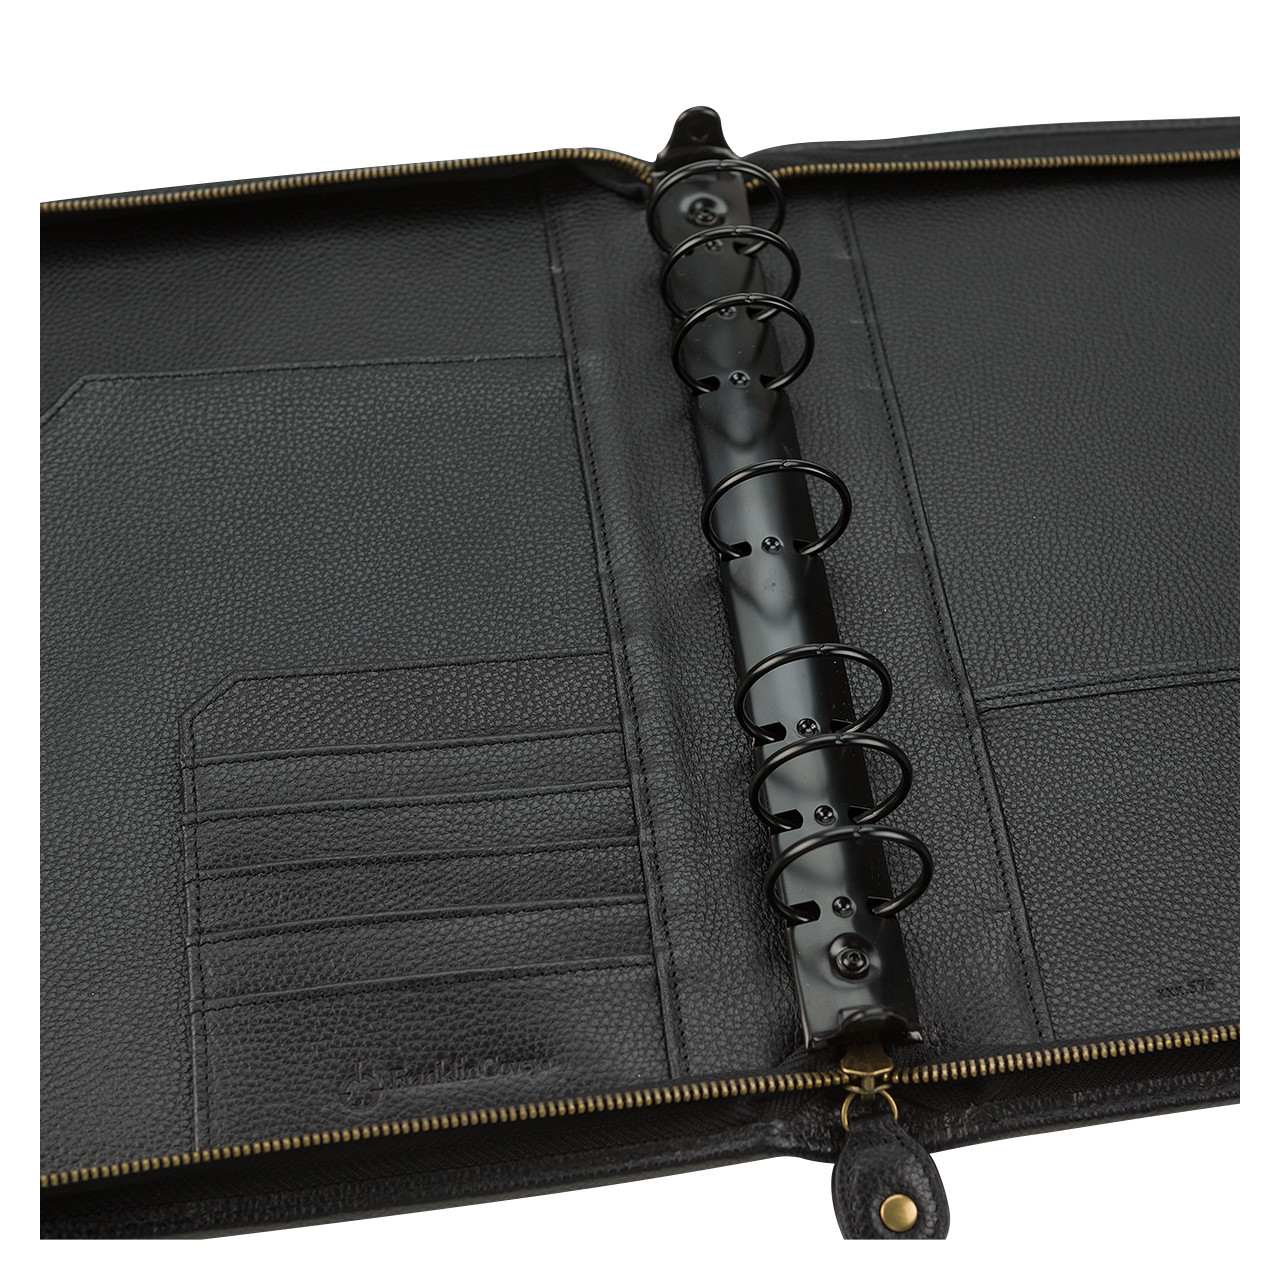 Franklin Covey Black Leather Zipped Organiser / Purse / Wallet